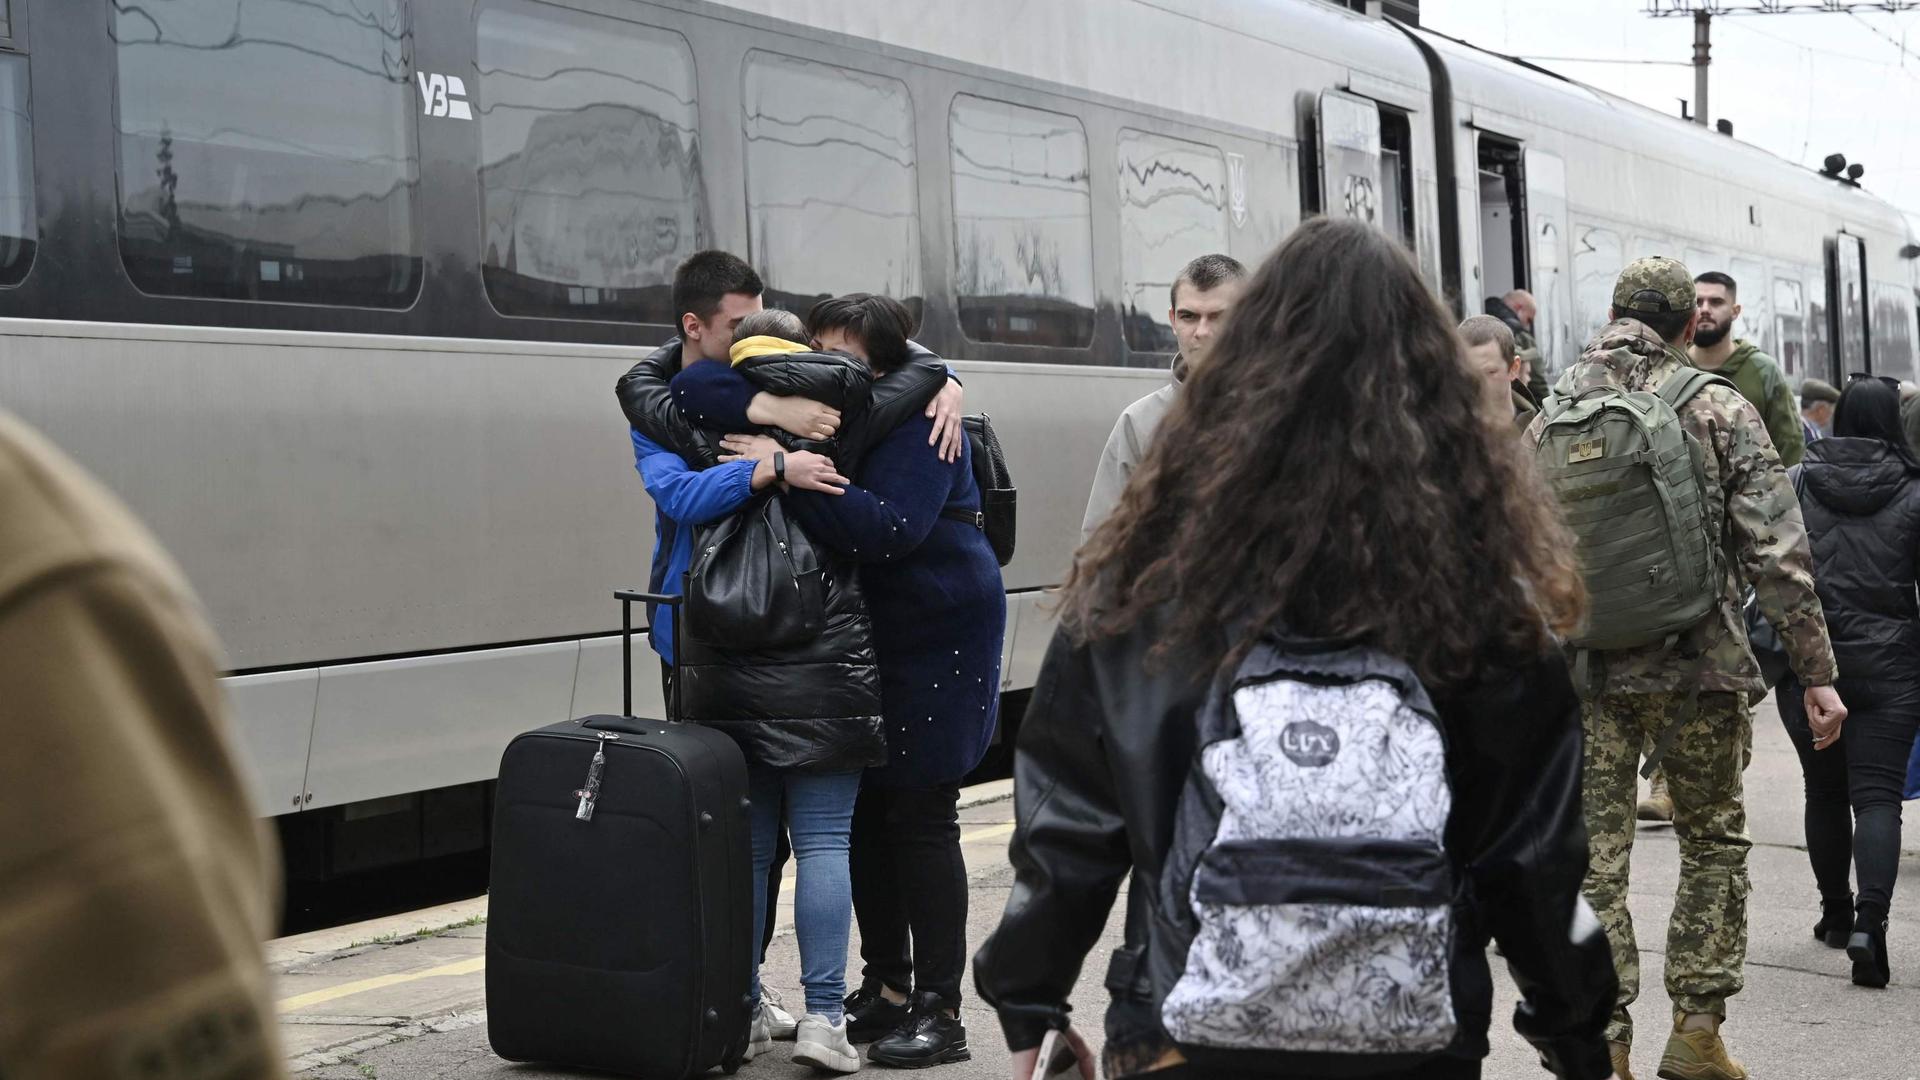 Passengers hug on a platform next to a train arriving from Kyiv at the train station in Kramatorsk, in the Donetsk region on April 8, 2023, amid the Russian invasion on Ukraine. - Ukrainians in the eastern city of Kramatorsk on April 8 laid flowers at a small memorial at the central train station one year after Russian missiles hit the transport hub killing dozens. The strikes on April 8, 2022, killed 61 people and injured more than 160 bystanders in one of the single deadliest attacks of the war that targeted civilians fleeing Russia's advance. (Photo by Genya SAVILOV / AFP)